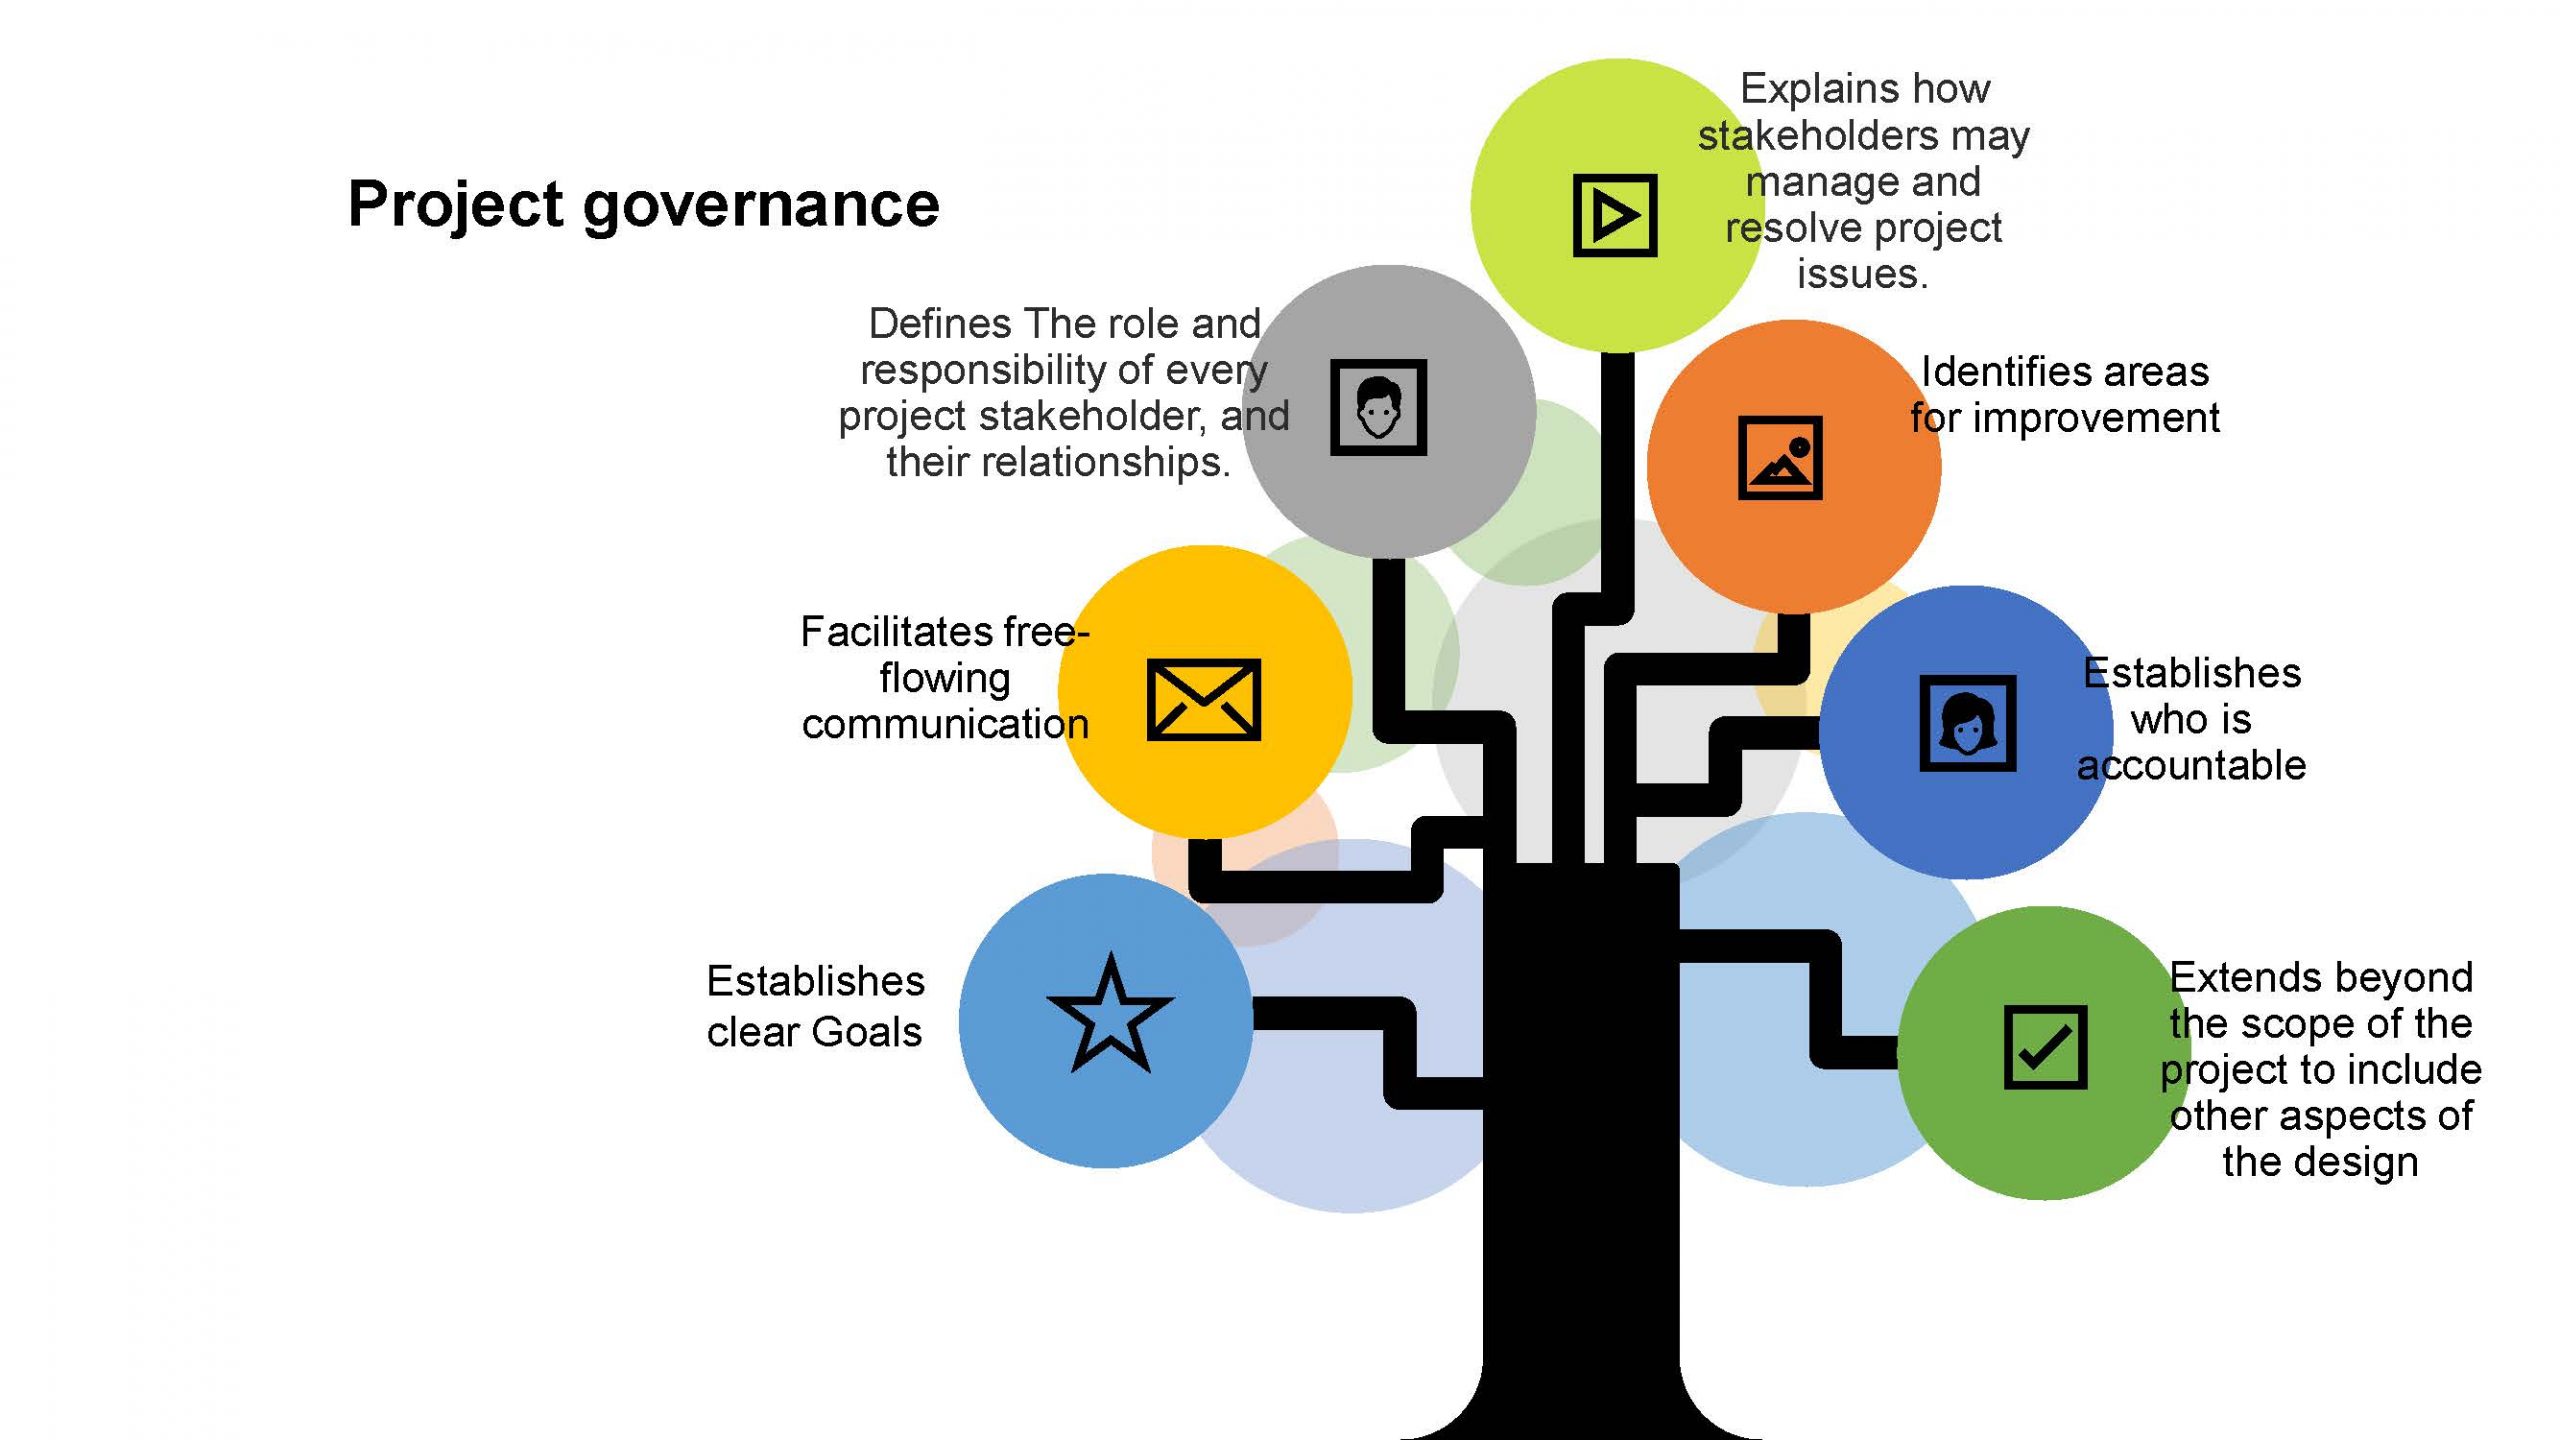 Image uses a try diagramme to show that project governance establishes goals, clarifies roles, identifies needs and communicates with stakeholders